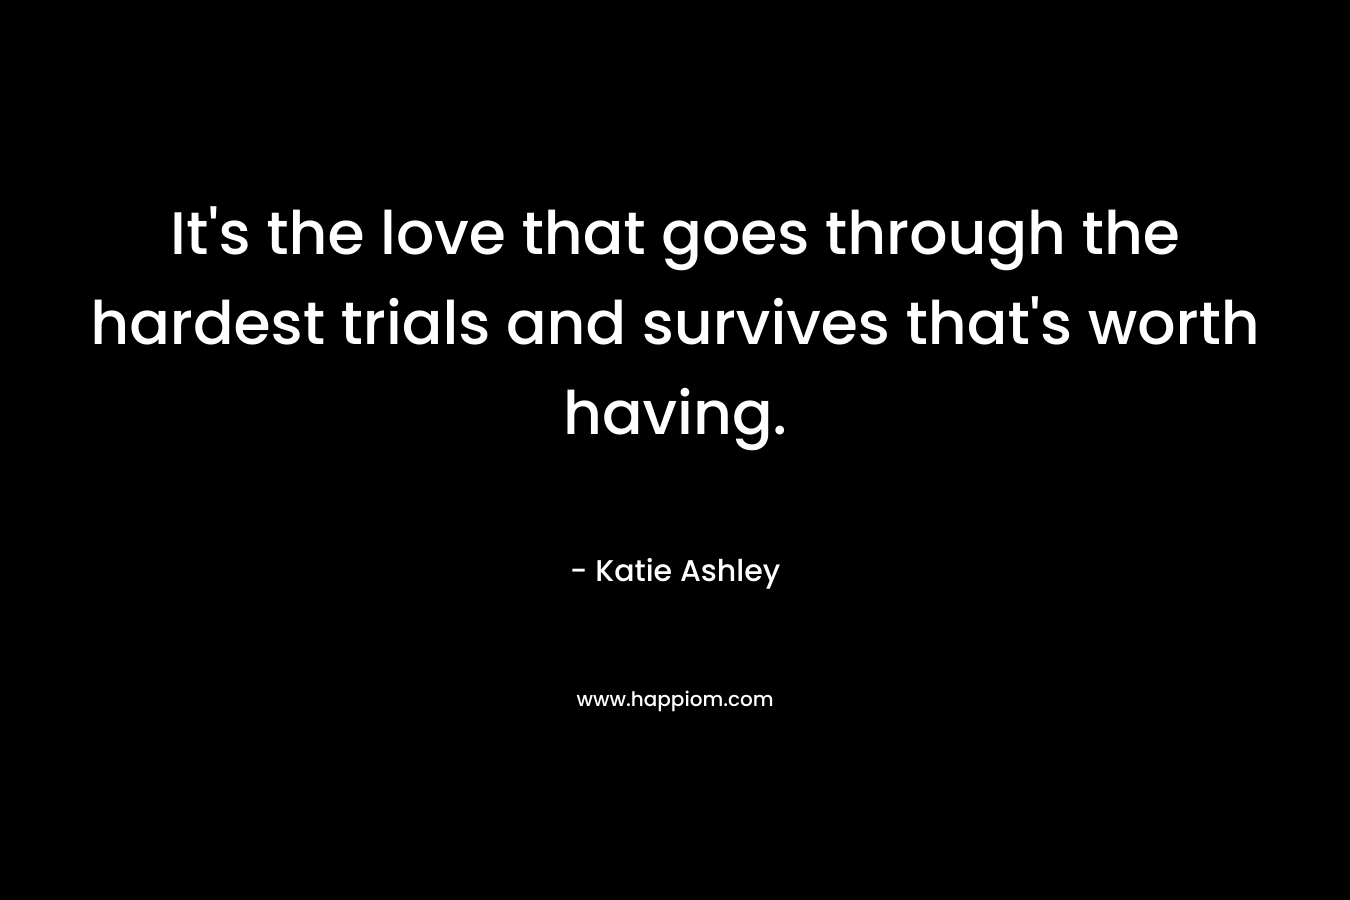 It’s the love that goes through the hardest trials and survives that’s worth having. – Katie Ashley